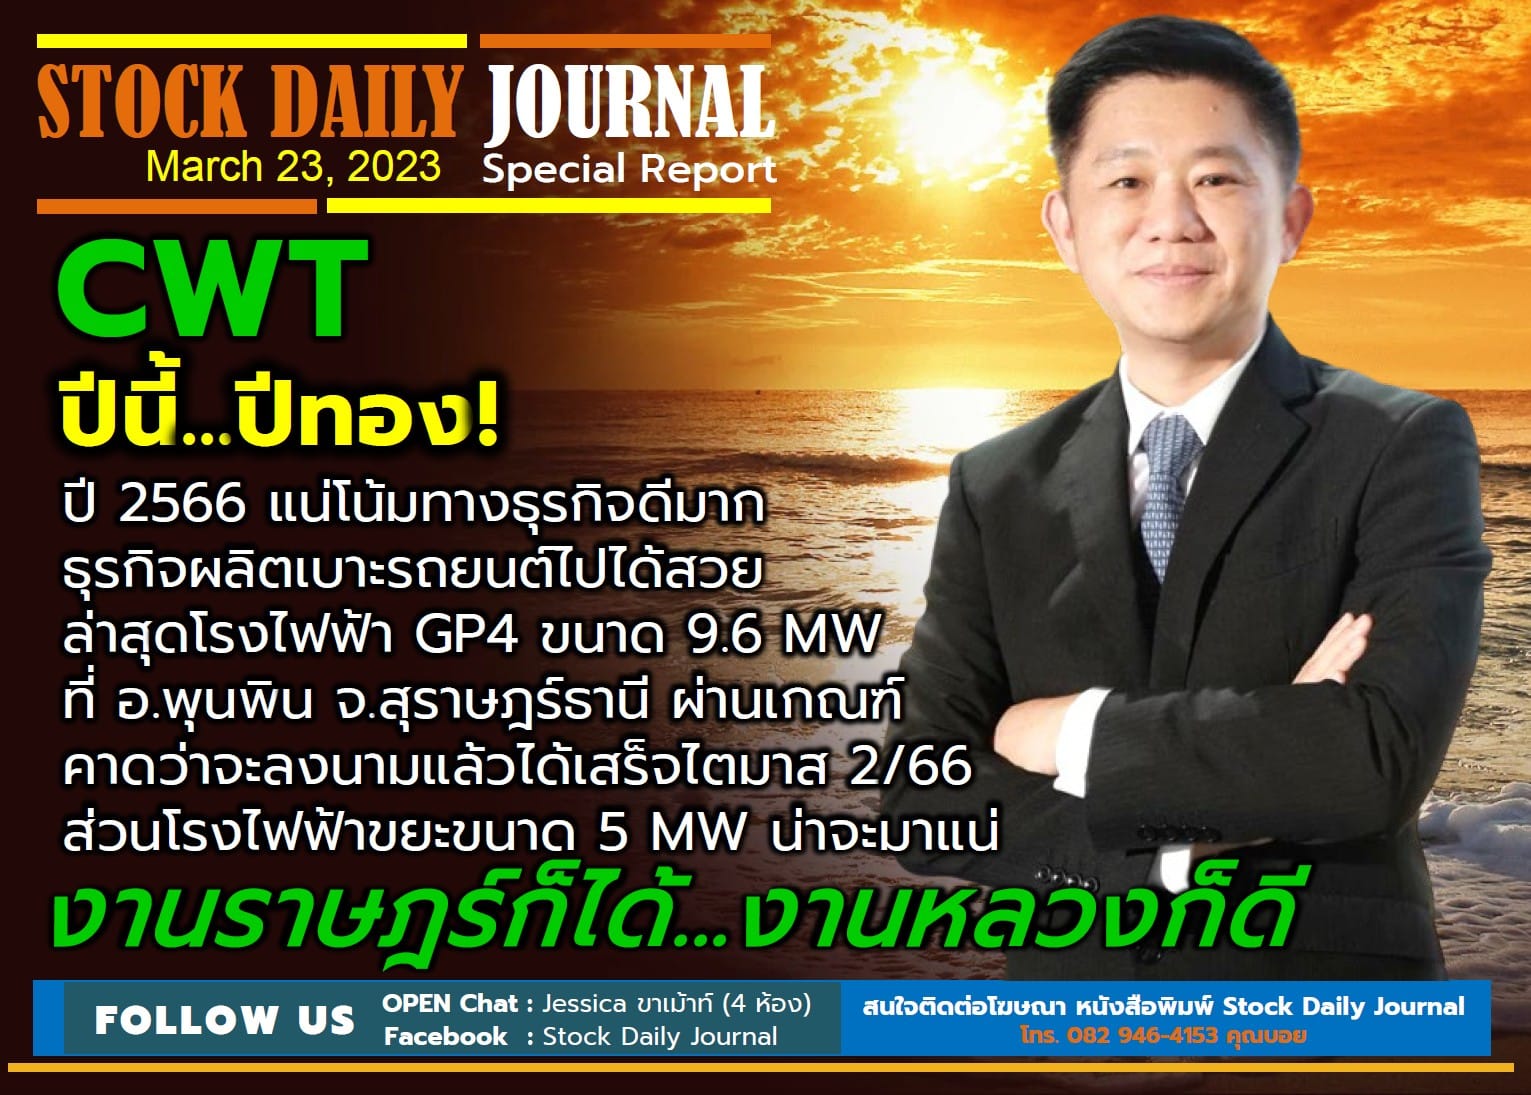 STOCK DAILY JOURNAL “Special Report : CWT”